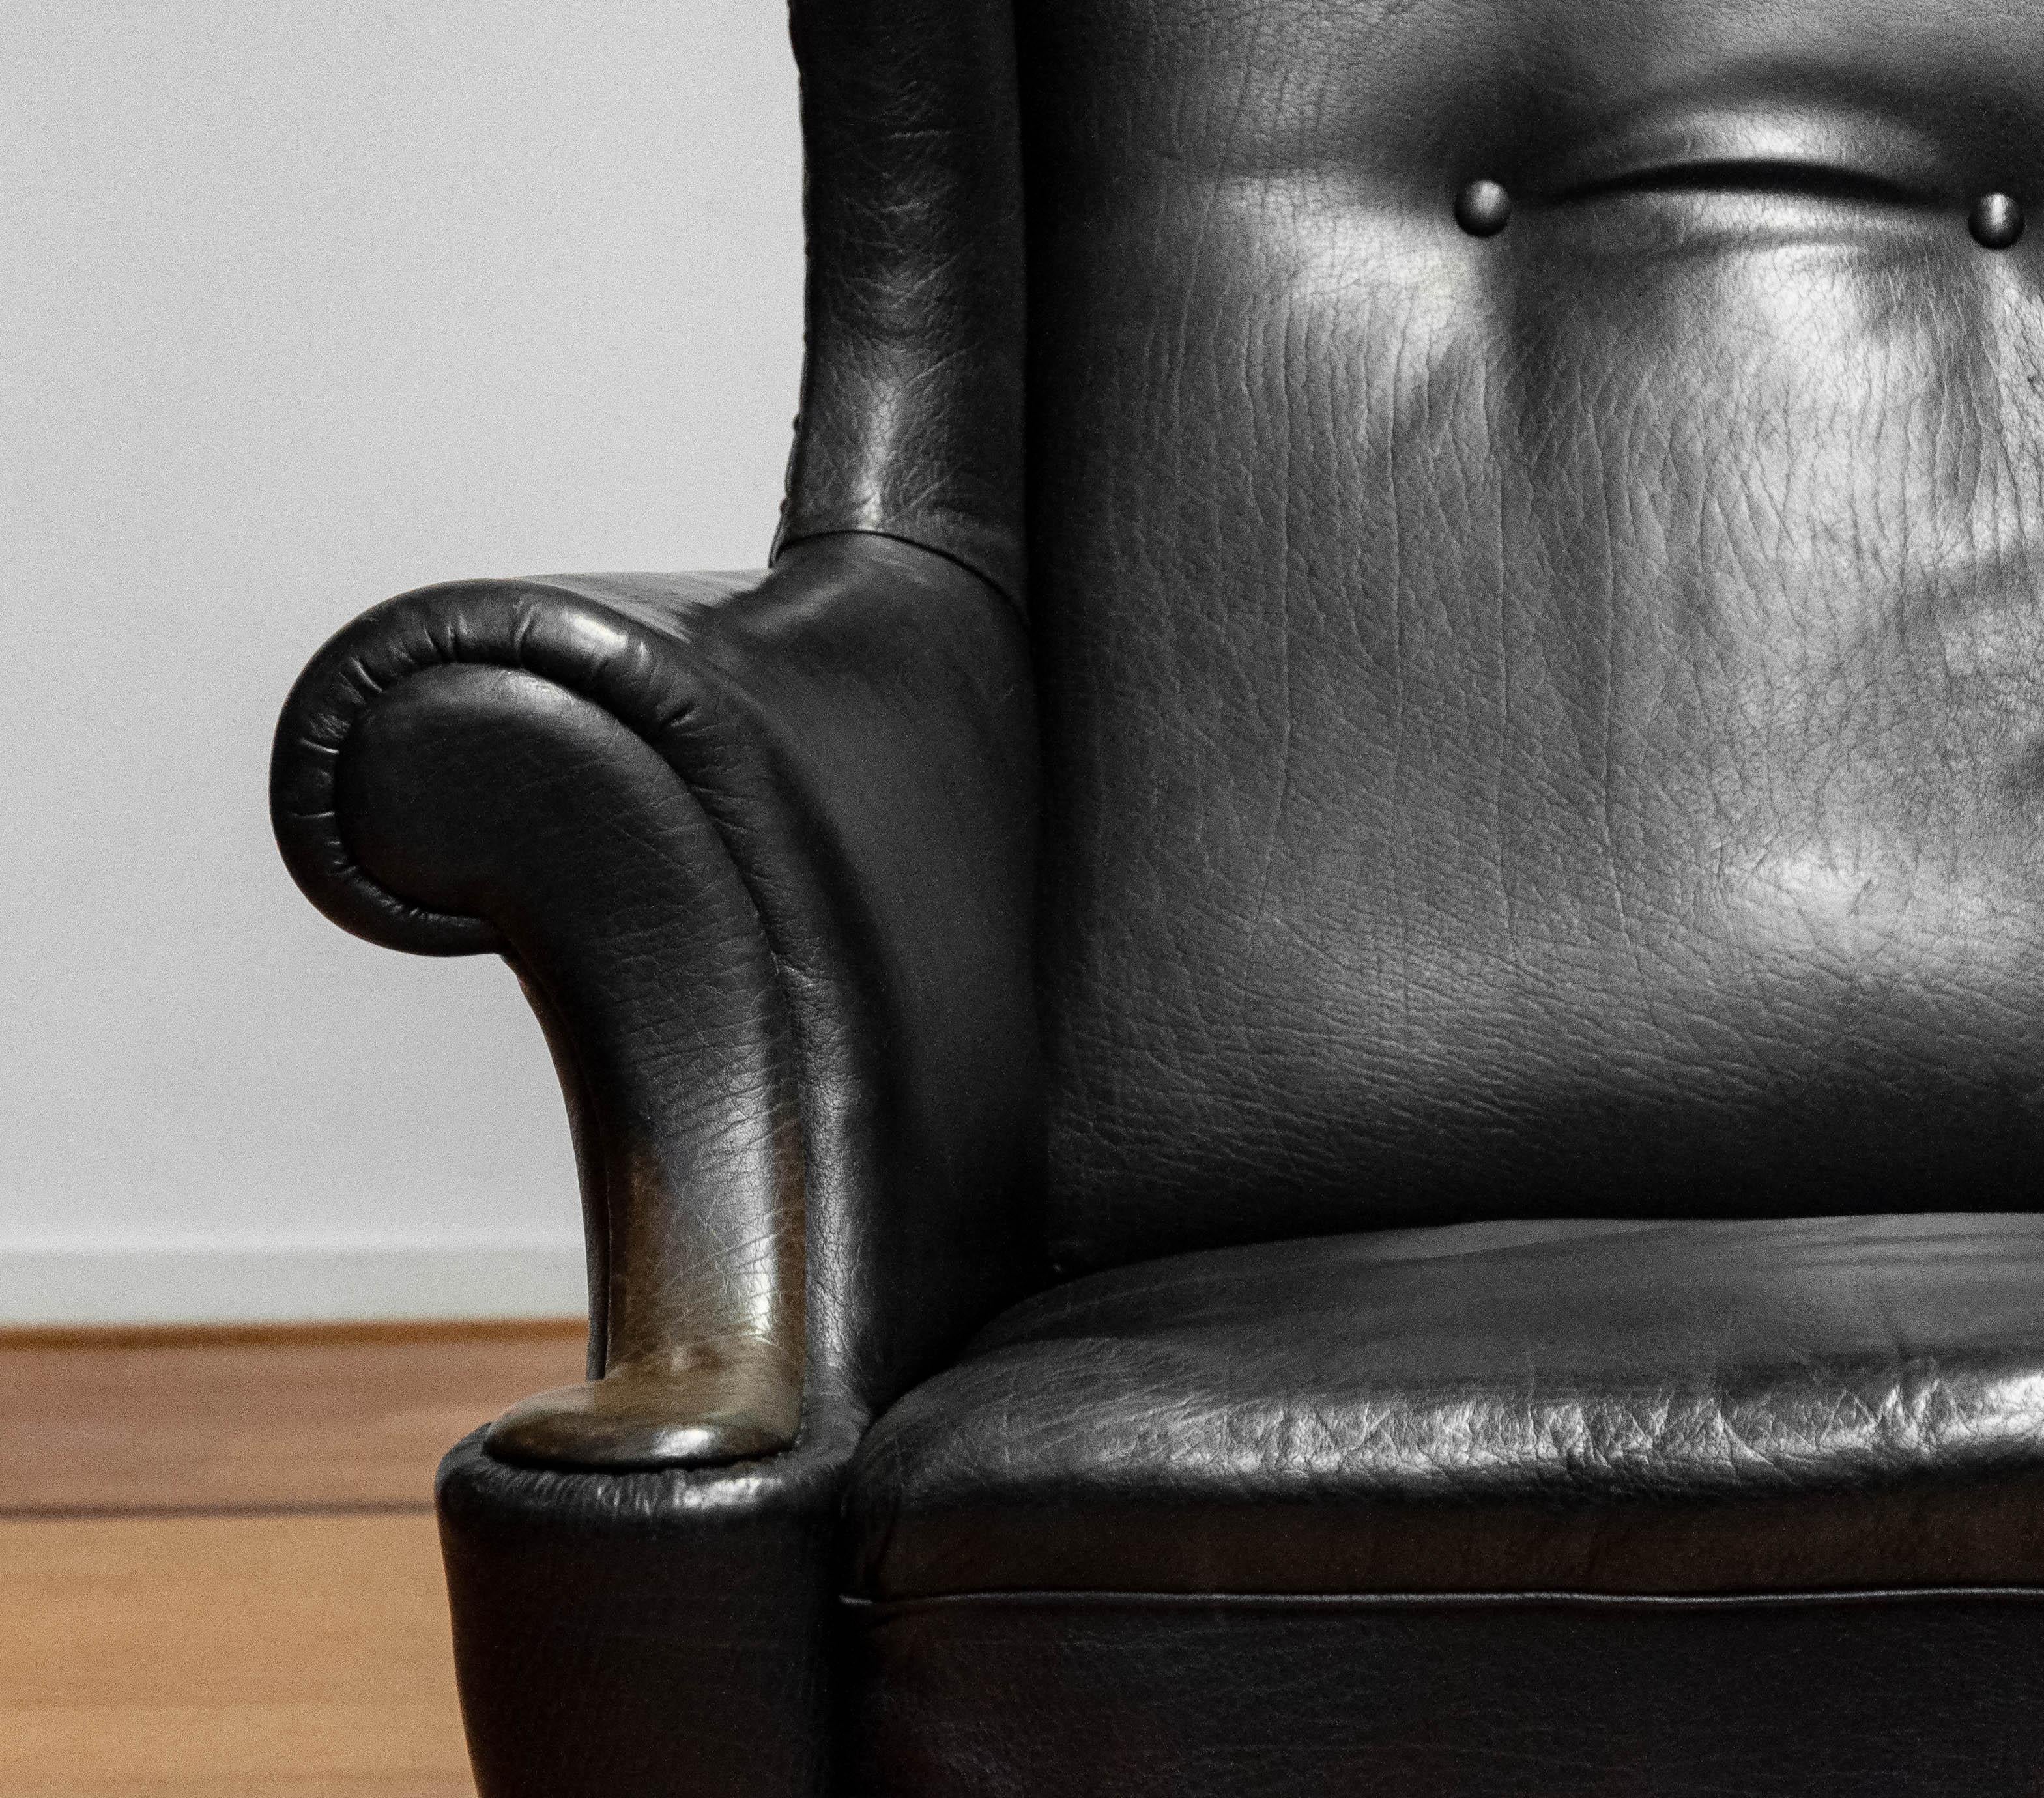 19th Century Black Leather Chippendale Wingback Chair With Claw And Ball Feet For Sale 2